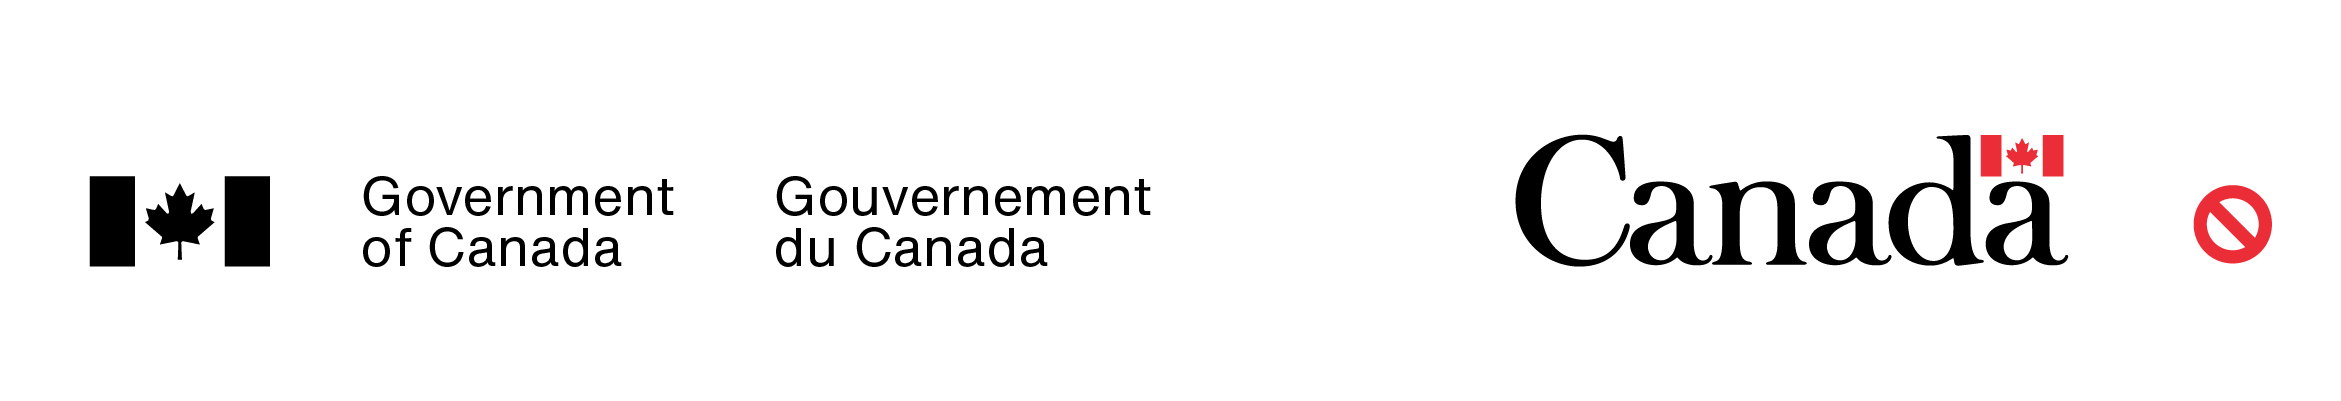 Example of incorrect colour pairing (the flag symbol in the Government of Canada signature and in the Canada wordmark are different colours)